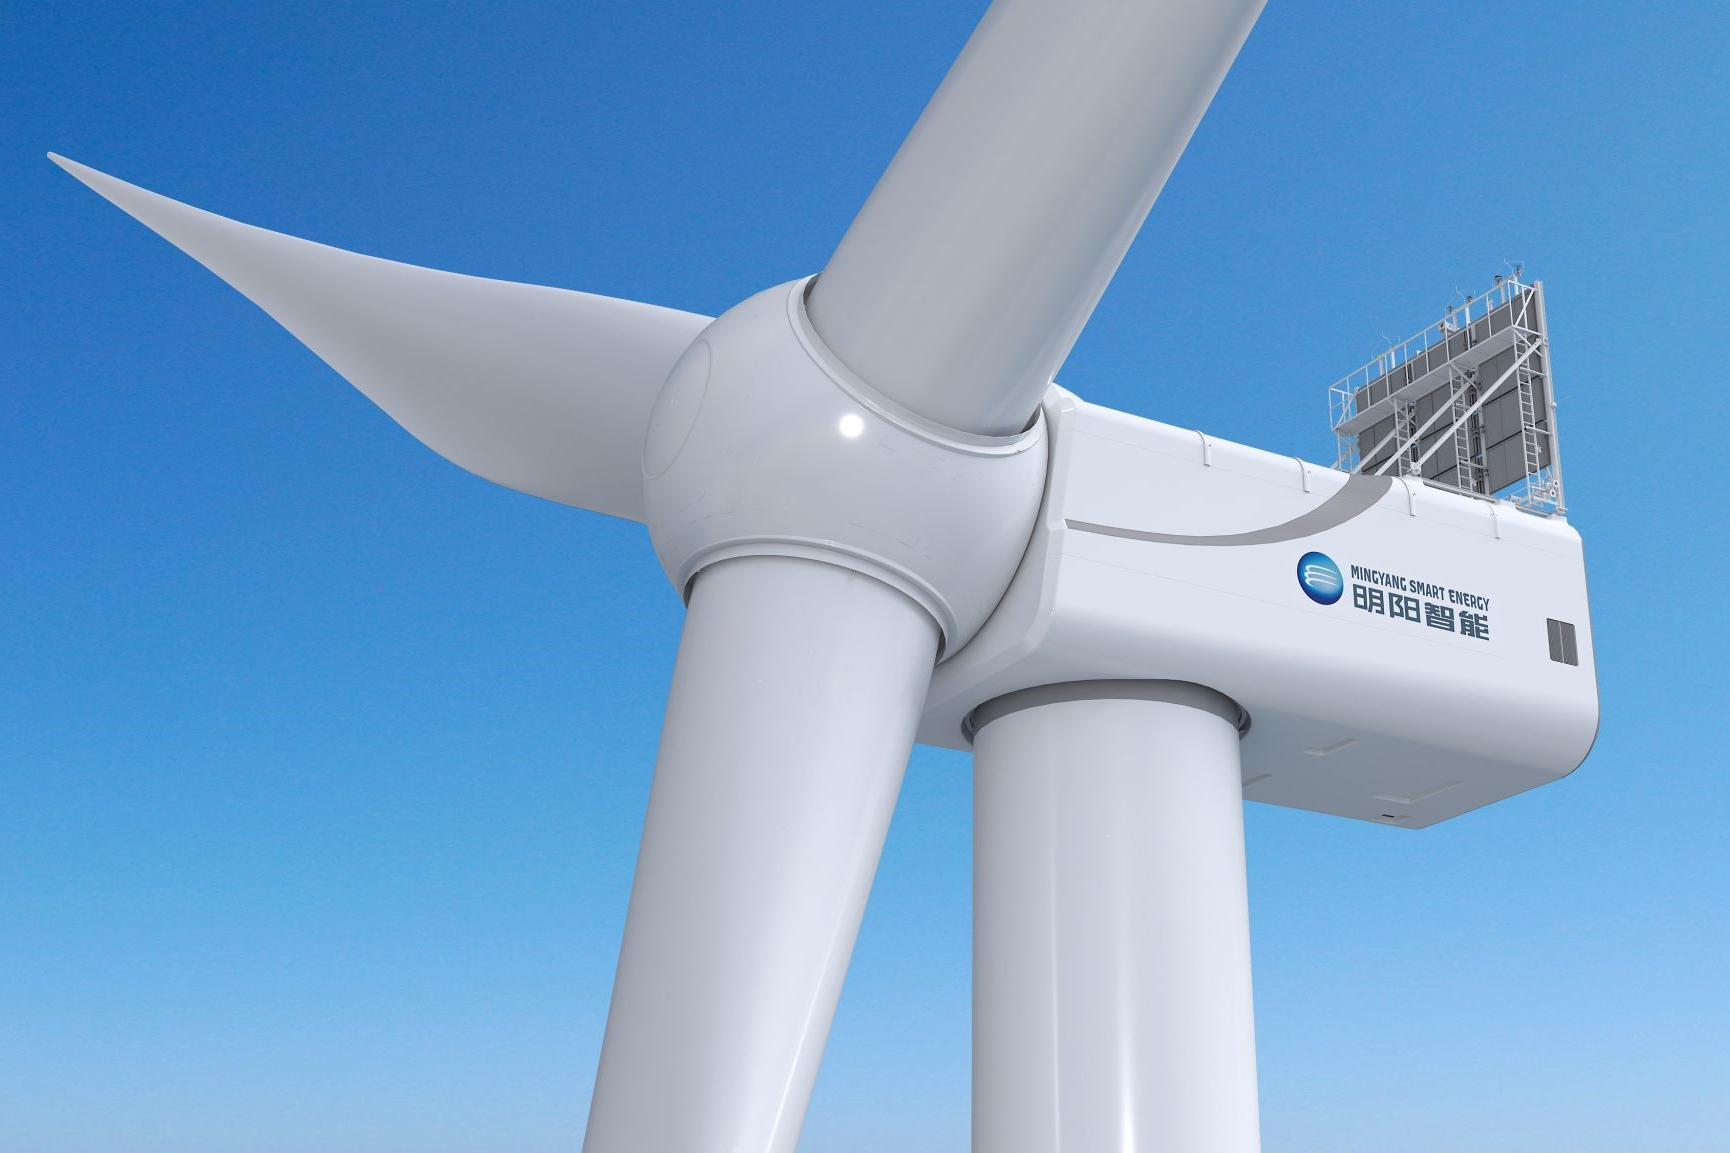 MingYang reveals 18-MW offshore wind turbine model with 140-meter